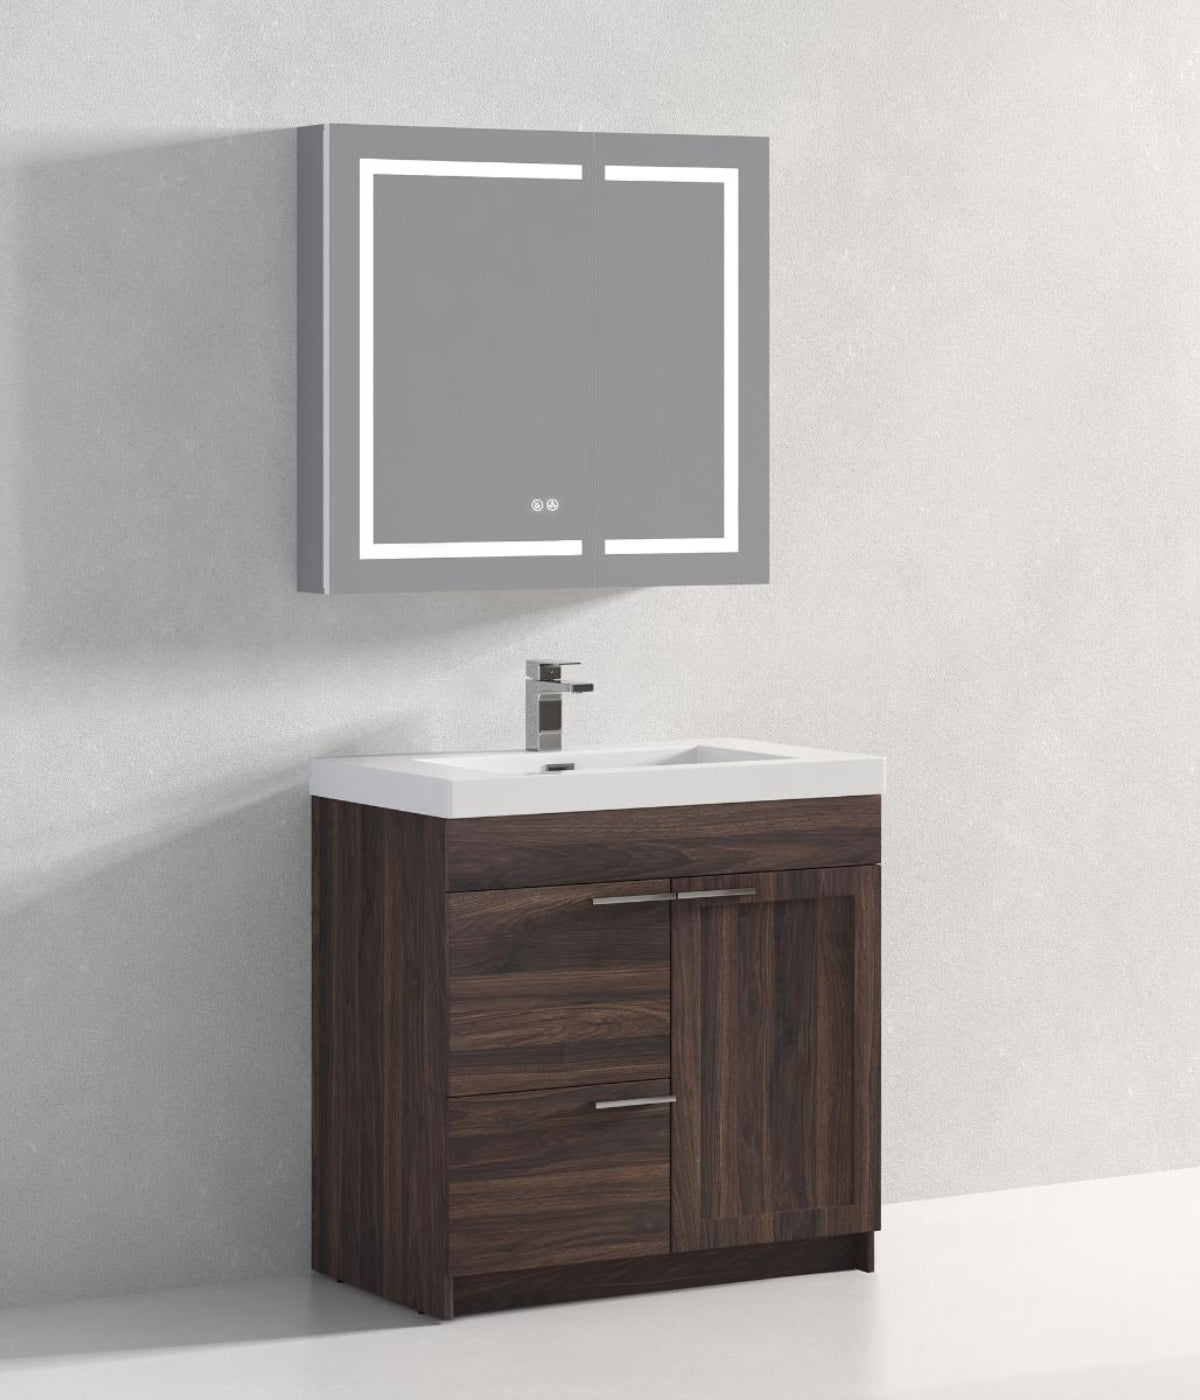 The ALL WOOD Hanover 36 from blossom may be the best value  bathroom wood vanity we offer